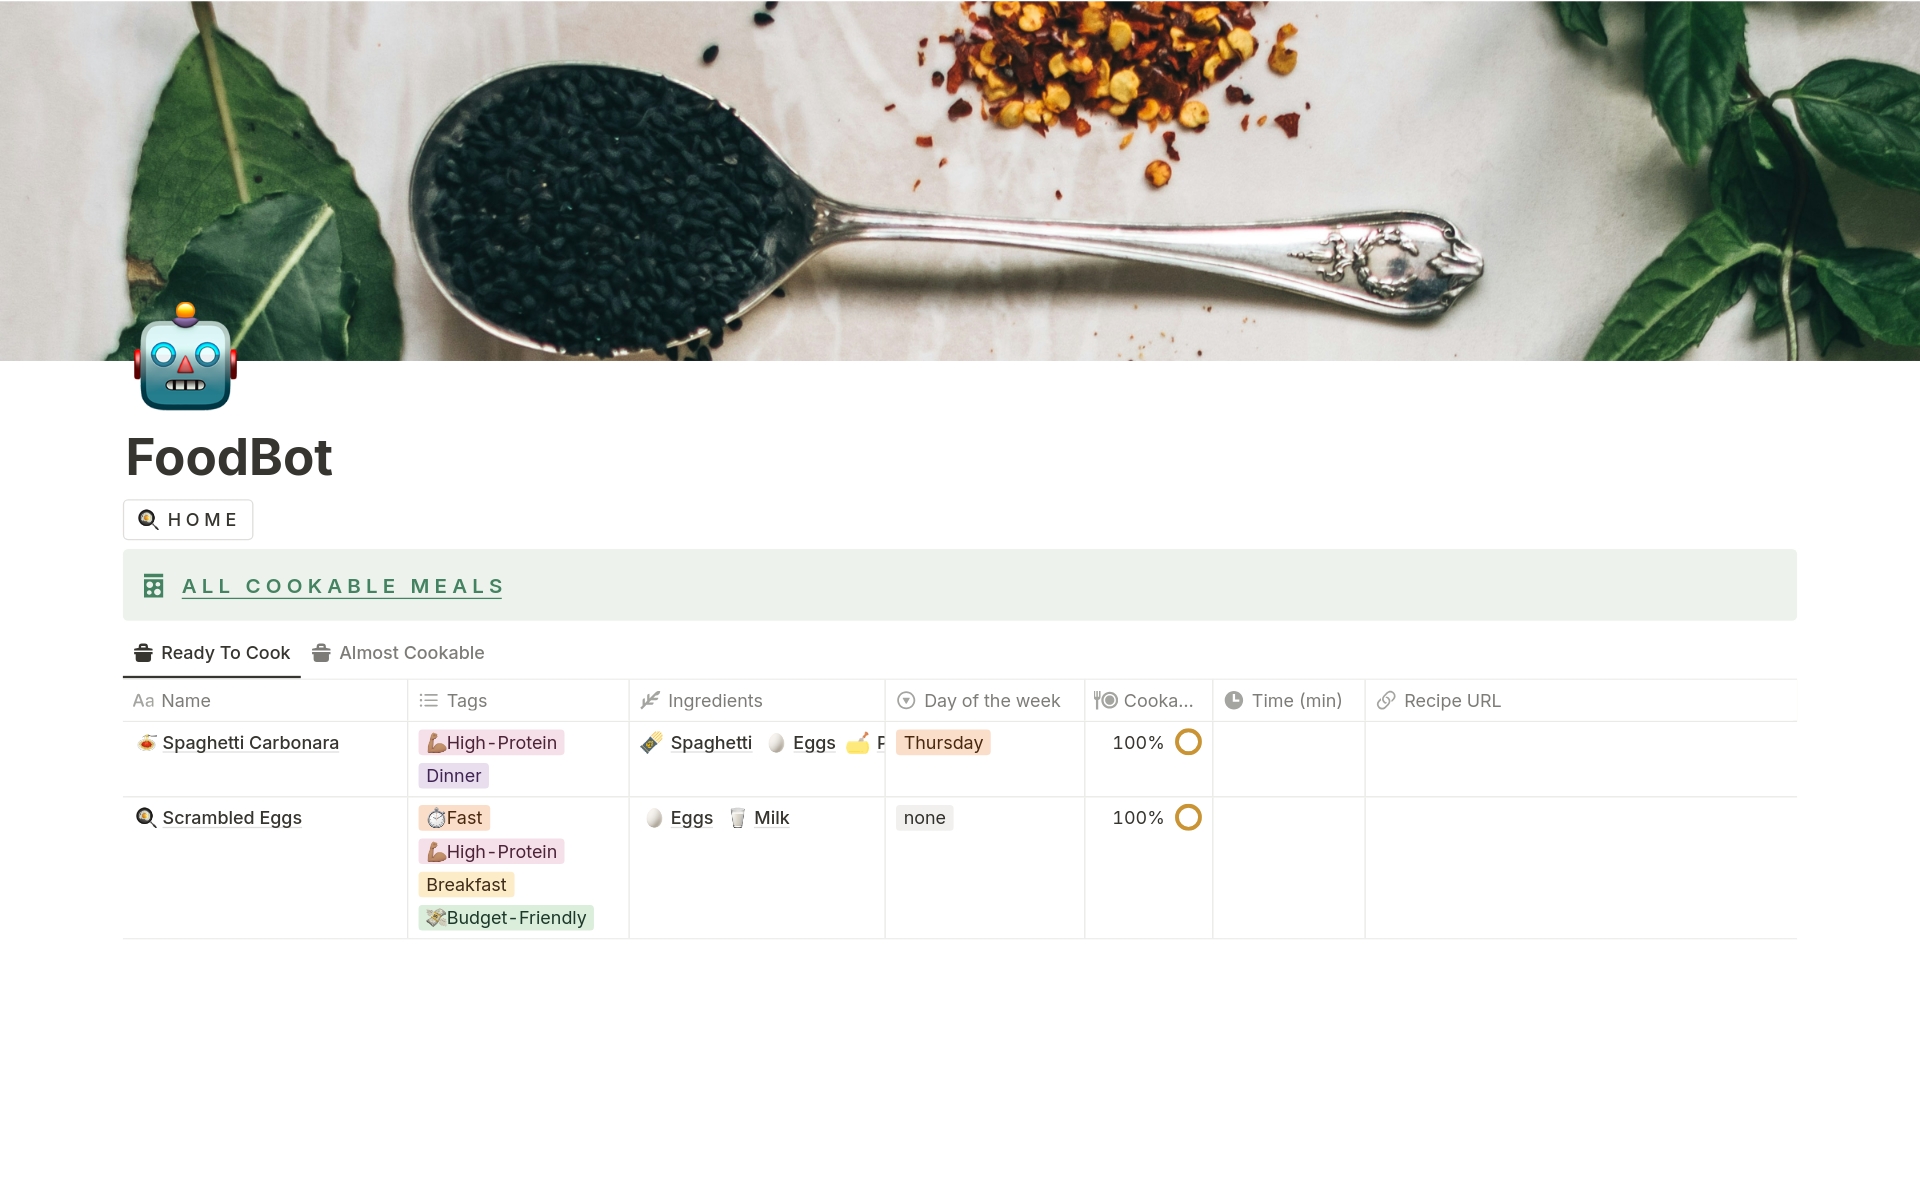 The "Culinary Complanion" Notion template is a versatile meal planning and recipe management tool that offers organized categories, a shopping list, a meal planner, and other features to streamline culinary tasks and enhance cooking experiences.